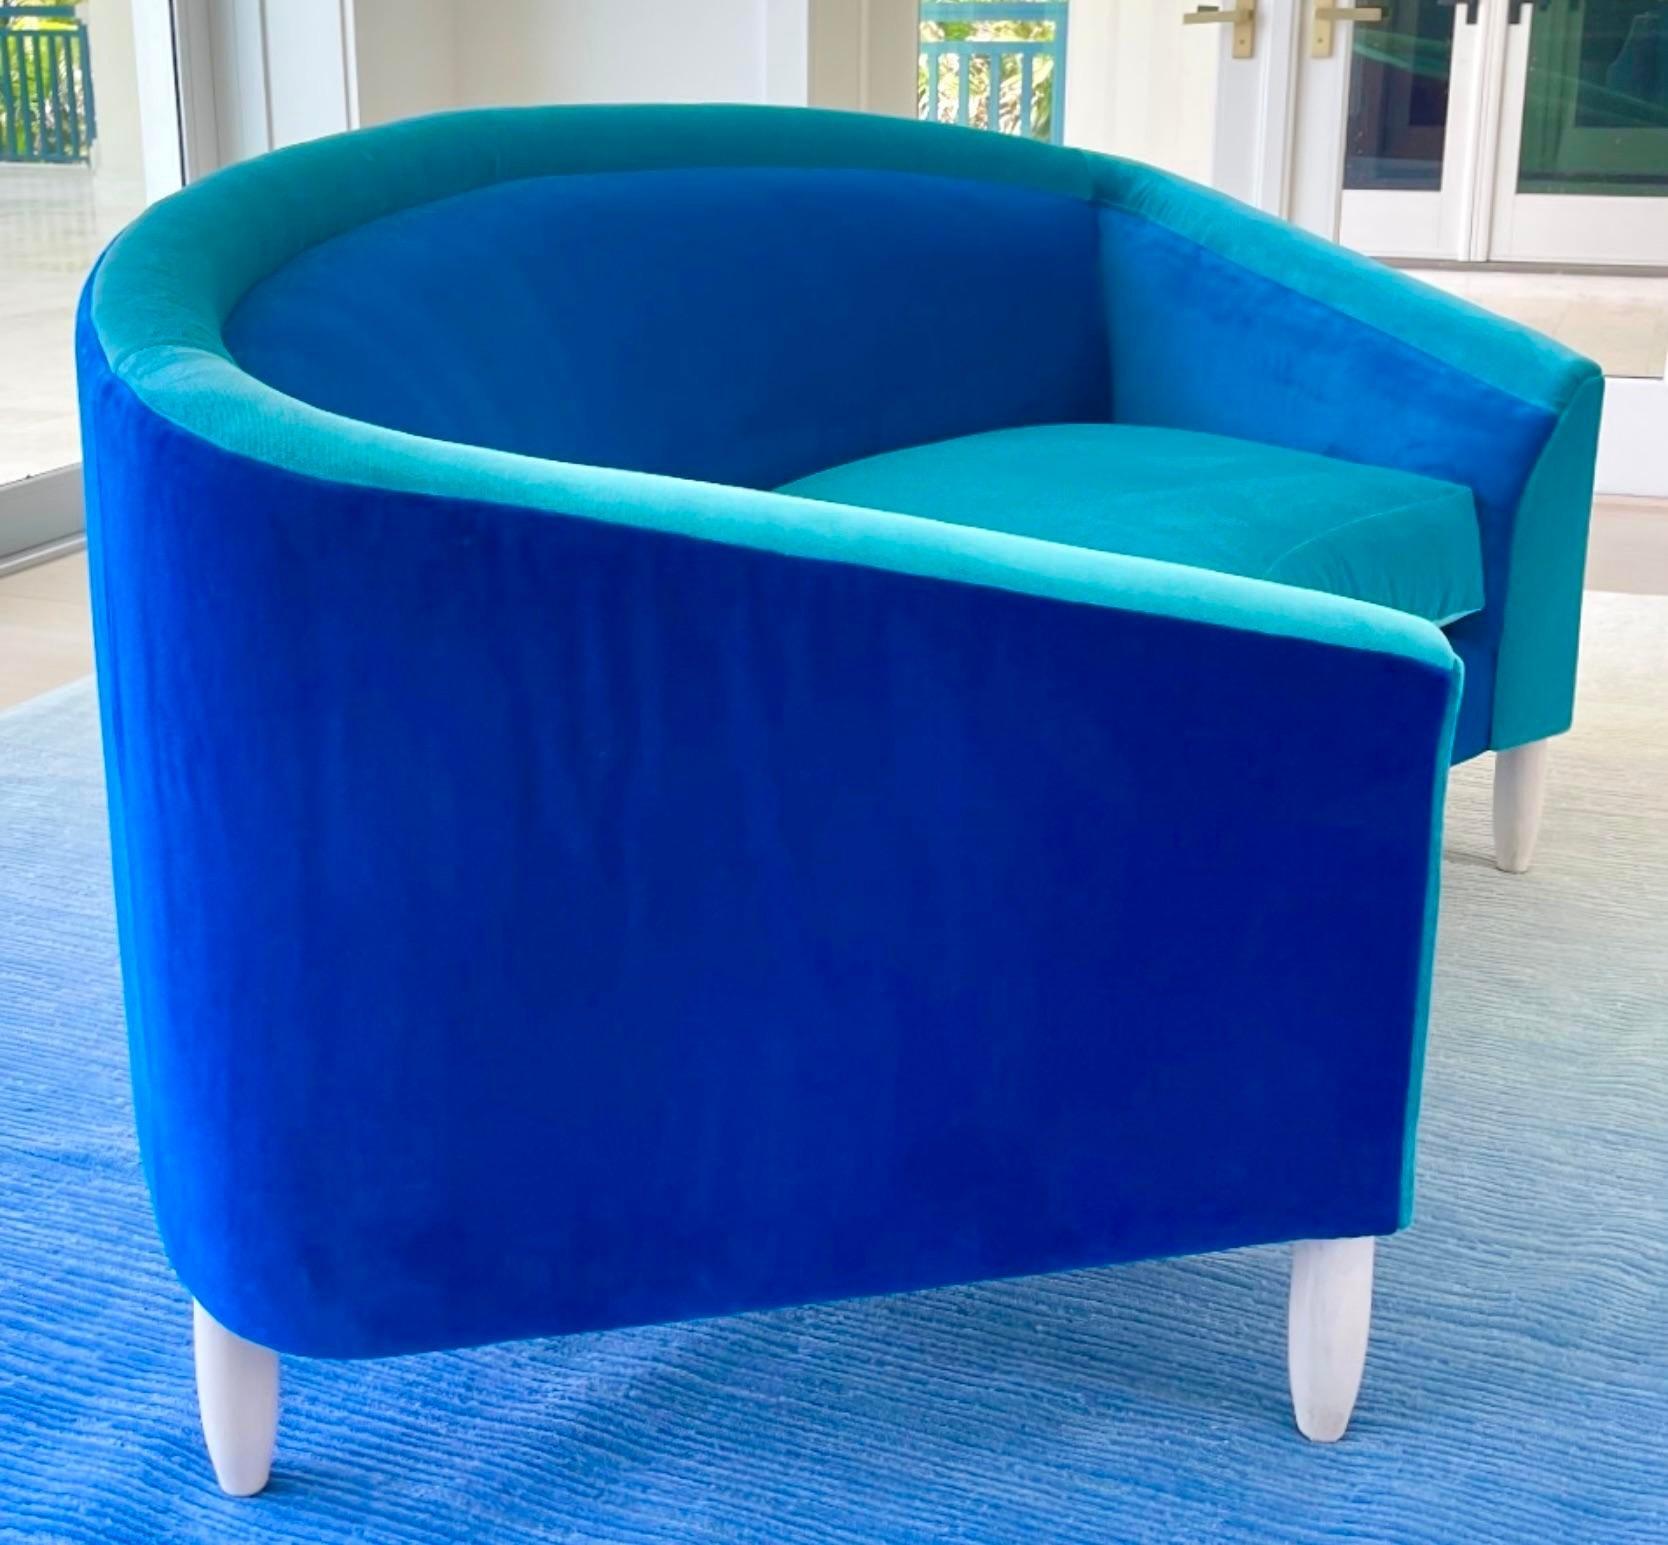 Custom Janie Molster Curved Velvet Color Block Sofa In Good Condition For Sale In west palm beach, FL